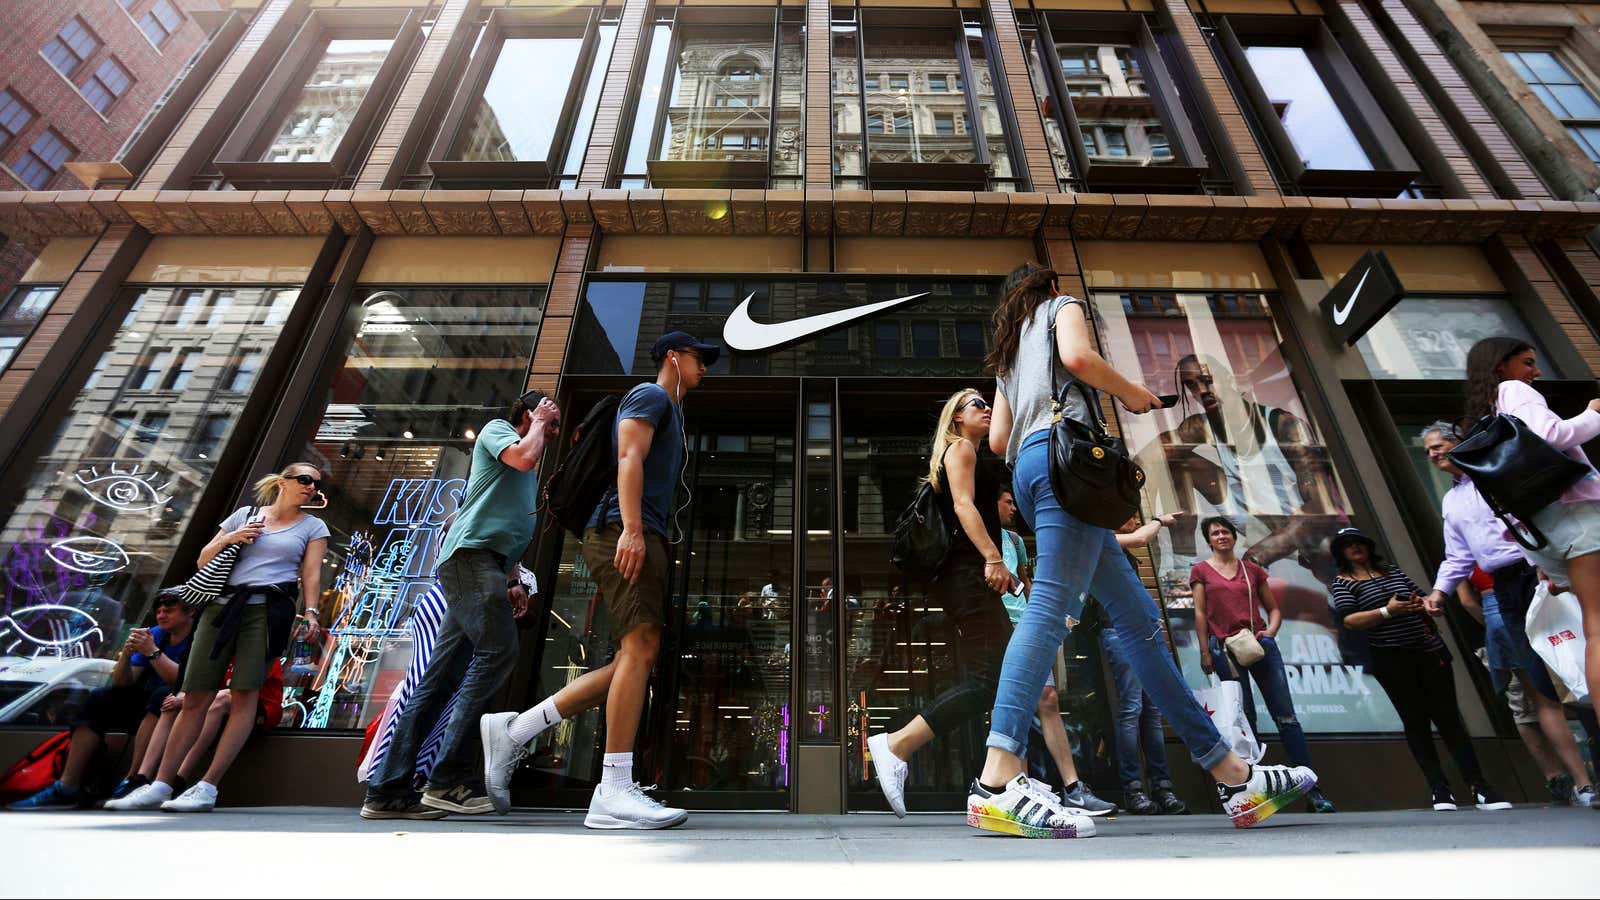 Nike is losing popularity to Adidas and Vans among teens, finds